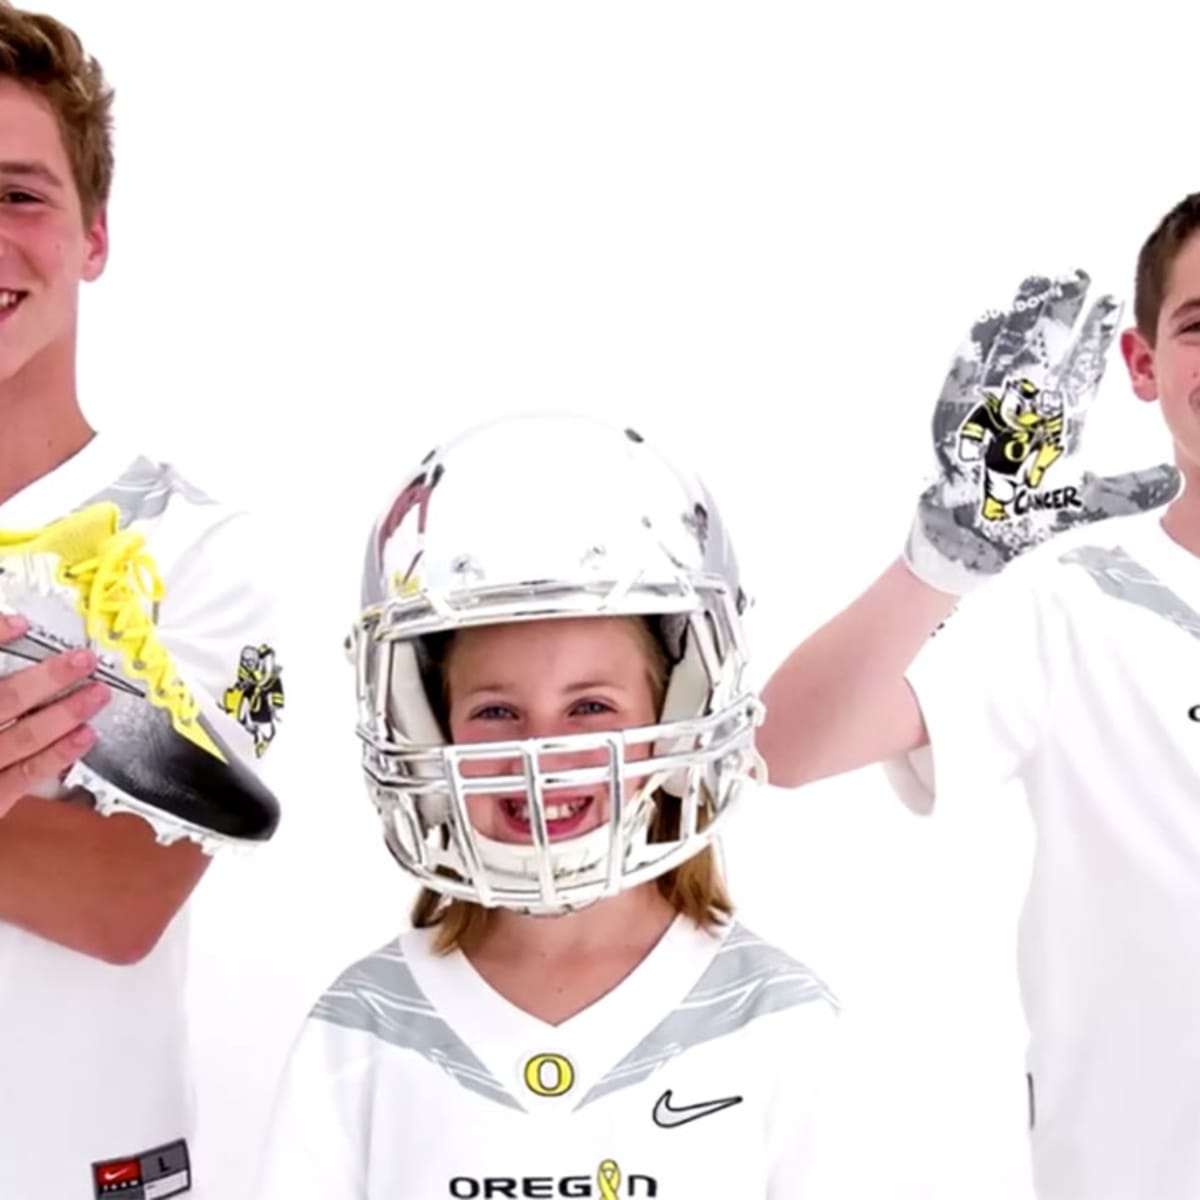 Oregon players weigh in on what 'Stomp Out Cancer' uniforms mean to them